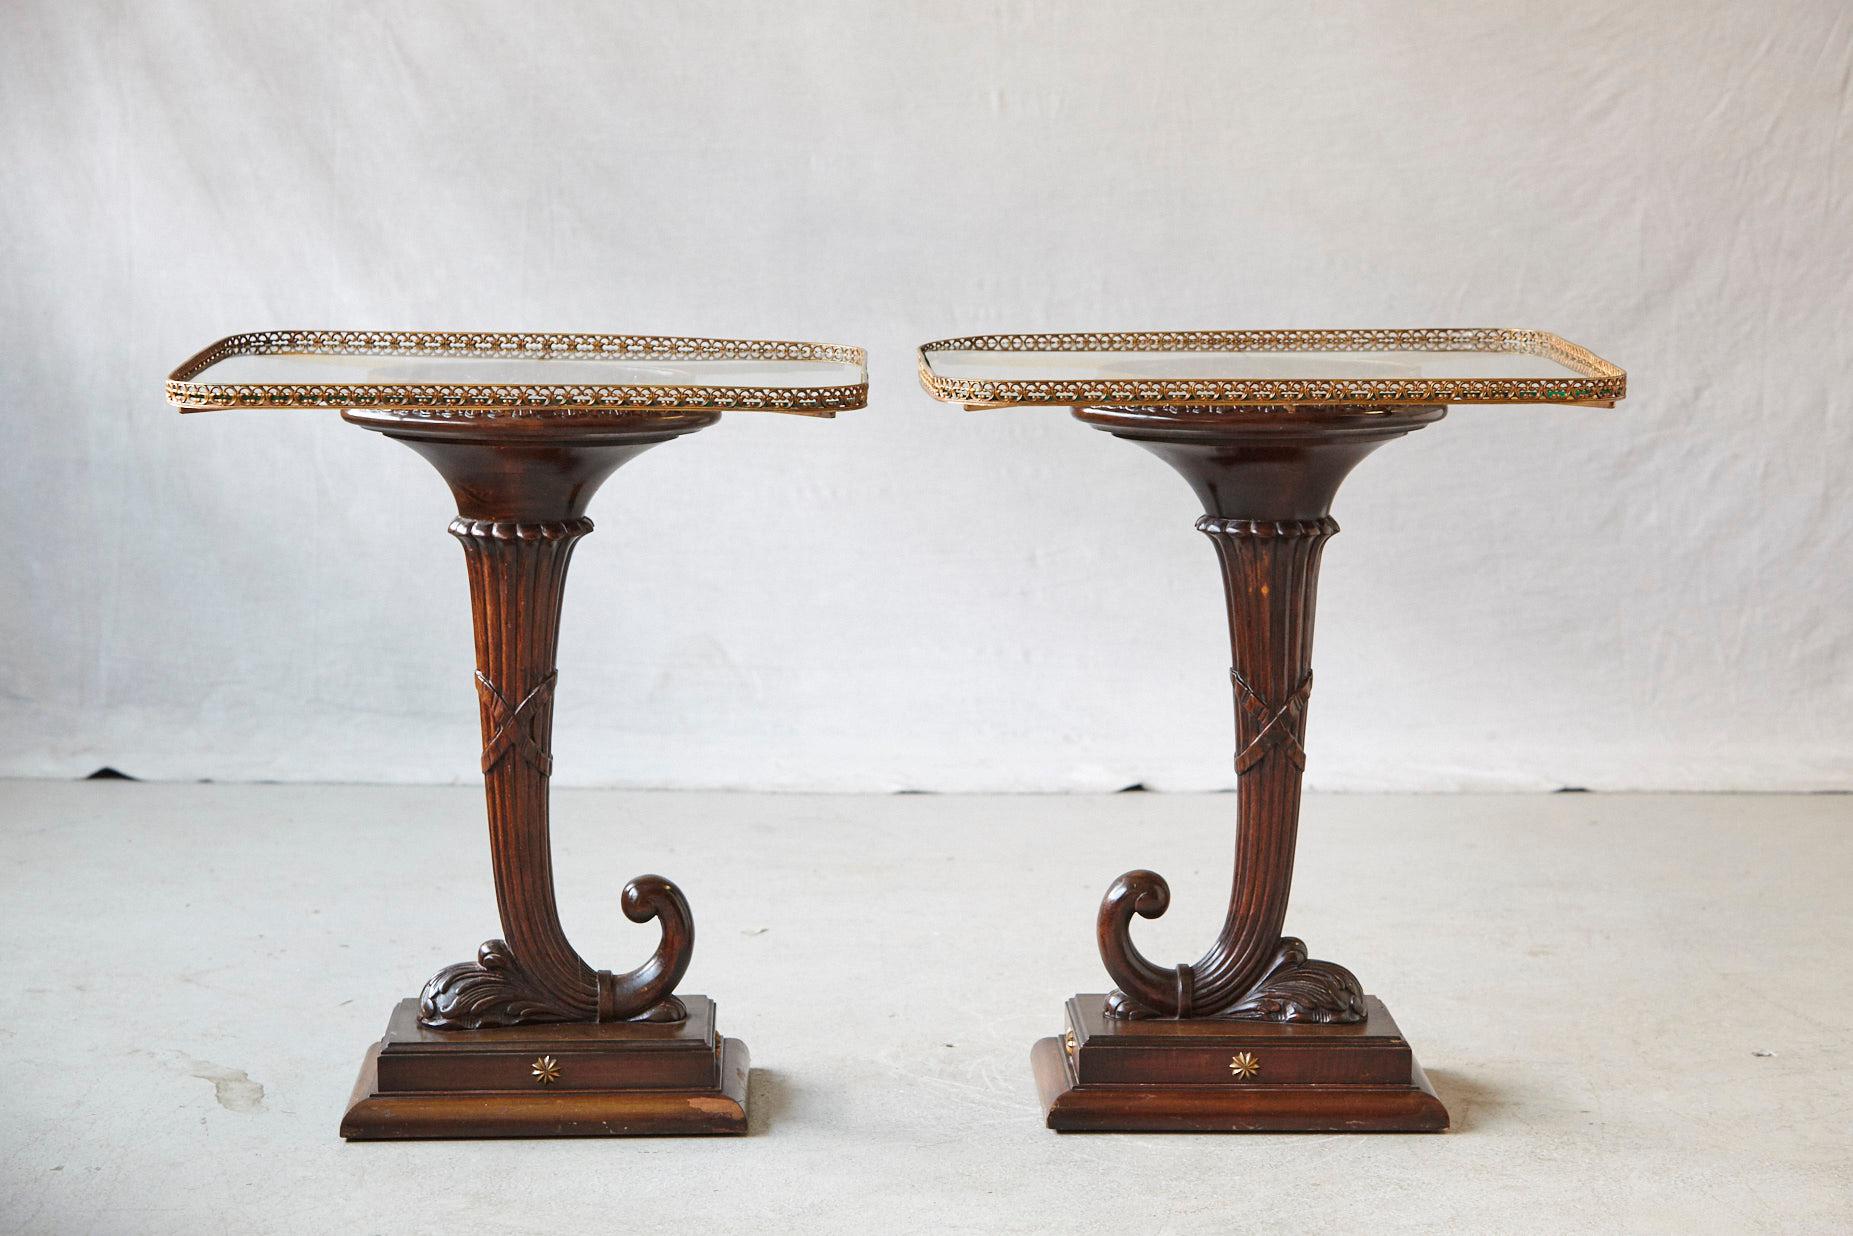 Neoclassical Pair of English Carved Cornucopia Glass Top Side Tables with Brass Galleries